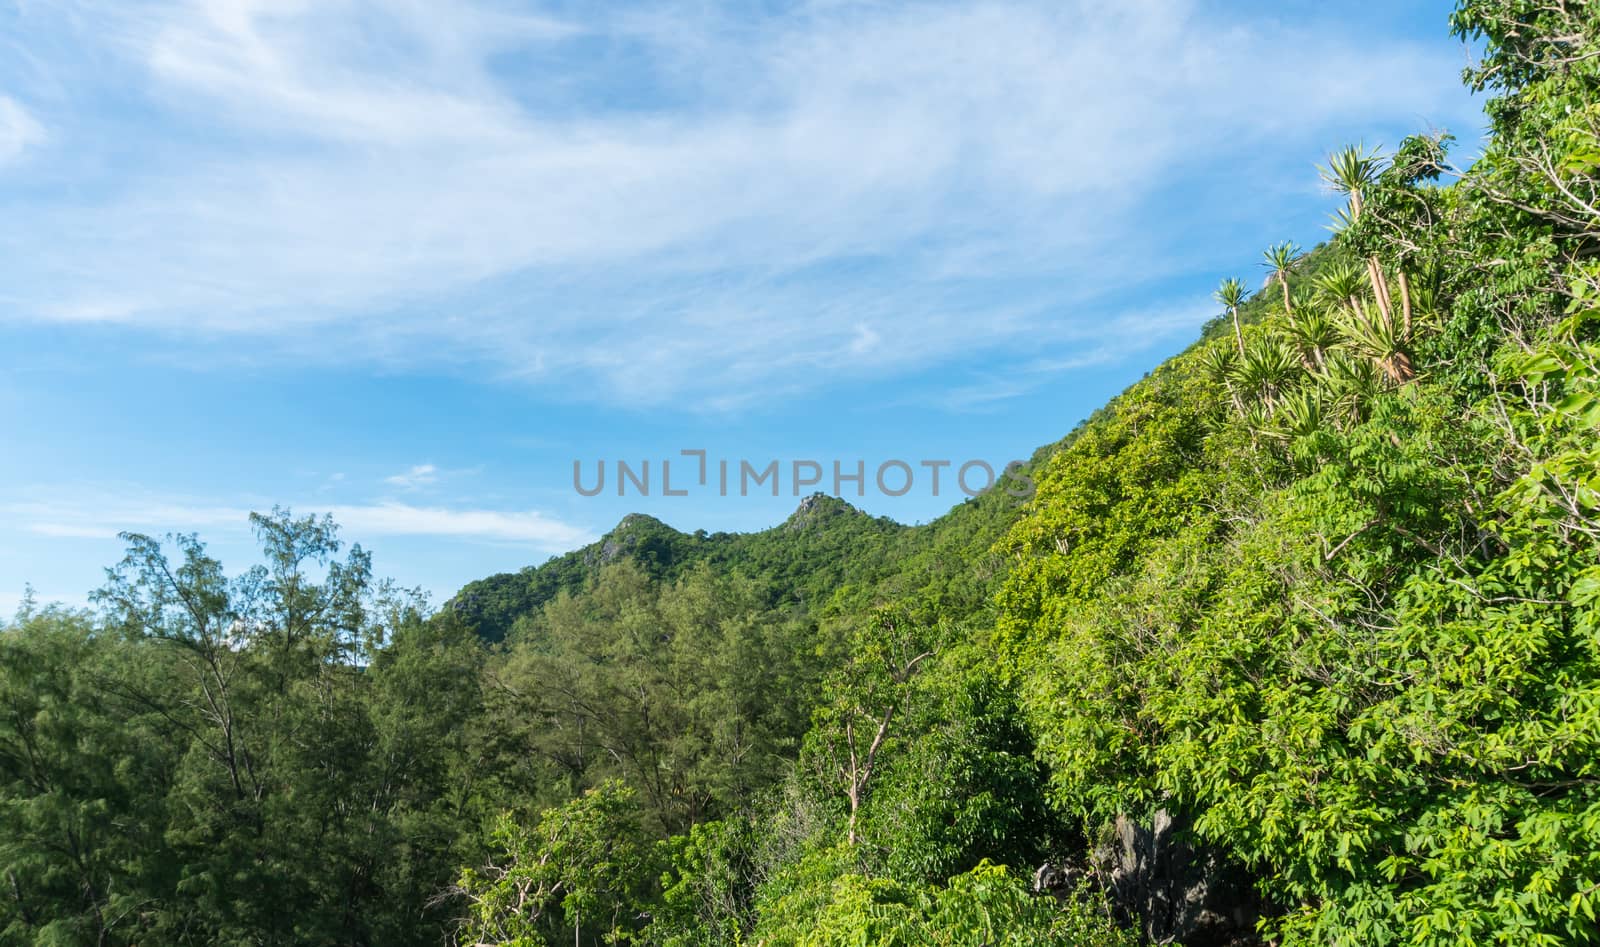 Green Tree on Rock or Stone Mountain or Hill and Blue Sky Prachuap Khiri Khan Thailand. Landscape or scenery summer season concept